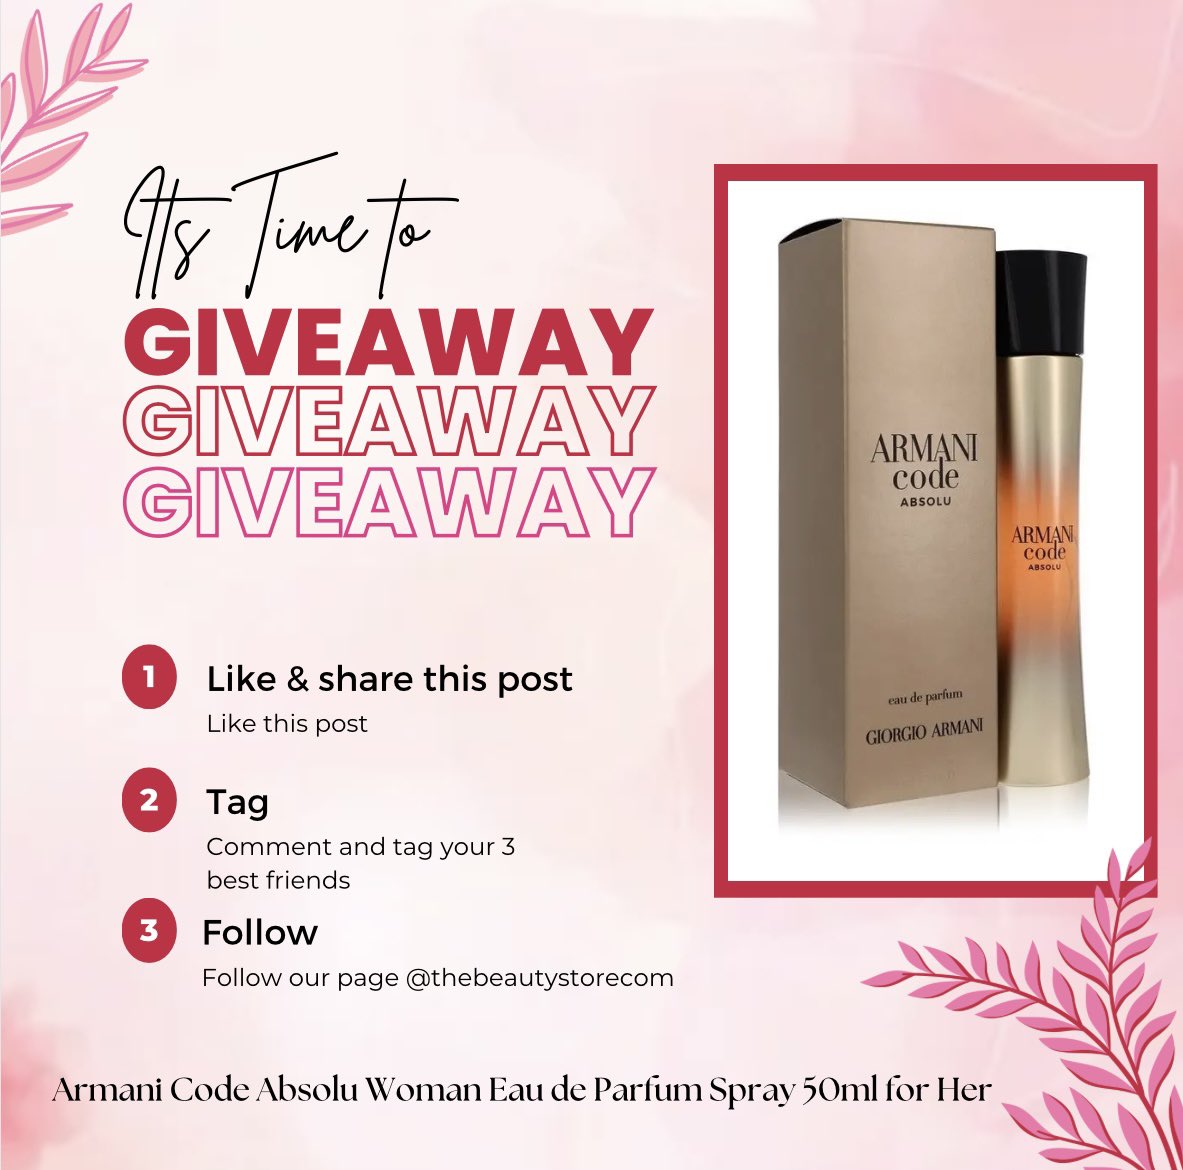 🎉Giveaway Time🎉 Win yourself Armani Code Absolu Woman Eau de Parfum Spray 50ml for Her To be in with a chance of winning all you need to do is: 1️⃣ Like & share this post 2️⃣ Tag 3 friends  3️⃣ FOLLOW us @thebeautystorecom 🎉 Competition ends Thursday 22nd February 6pm!